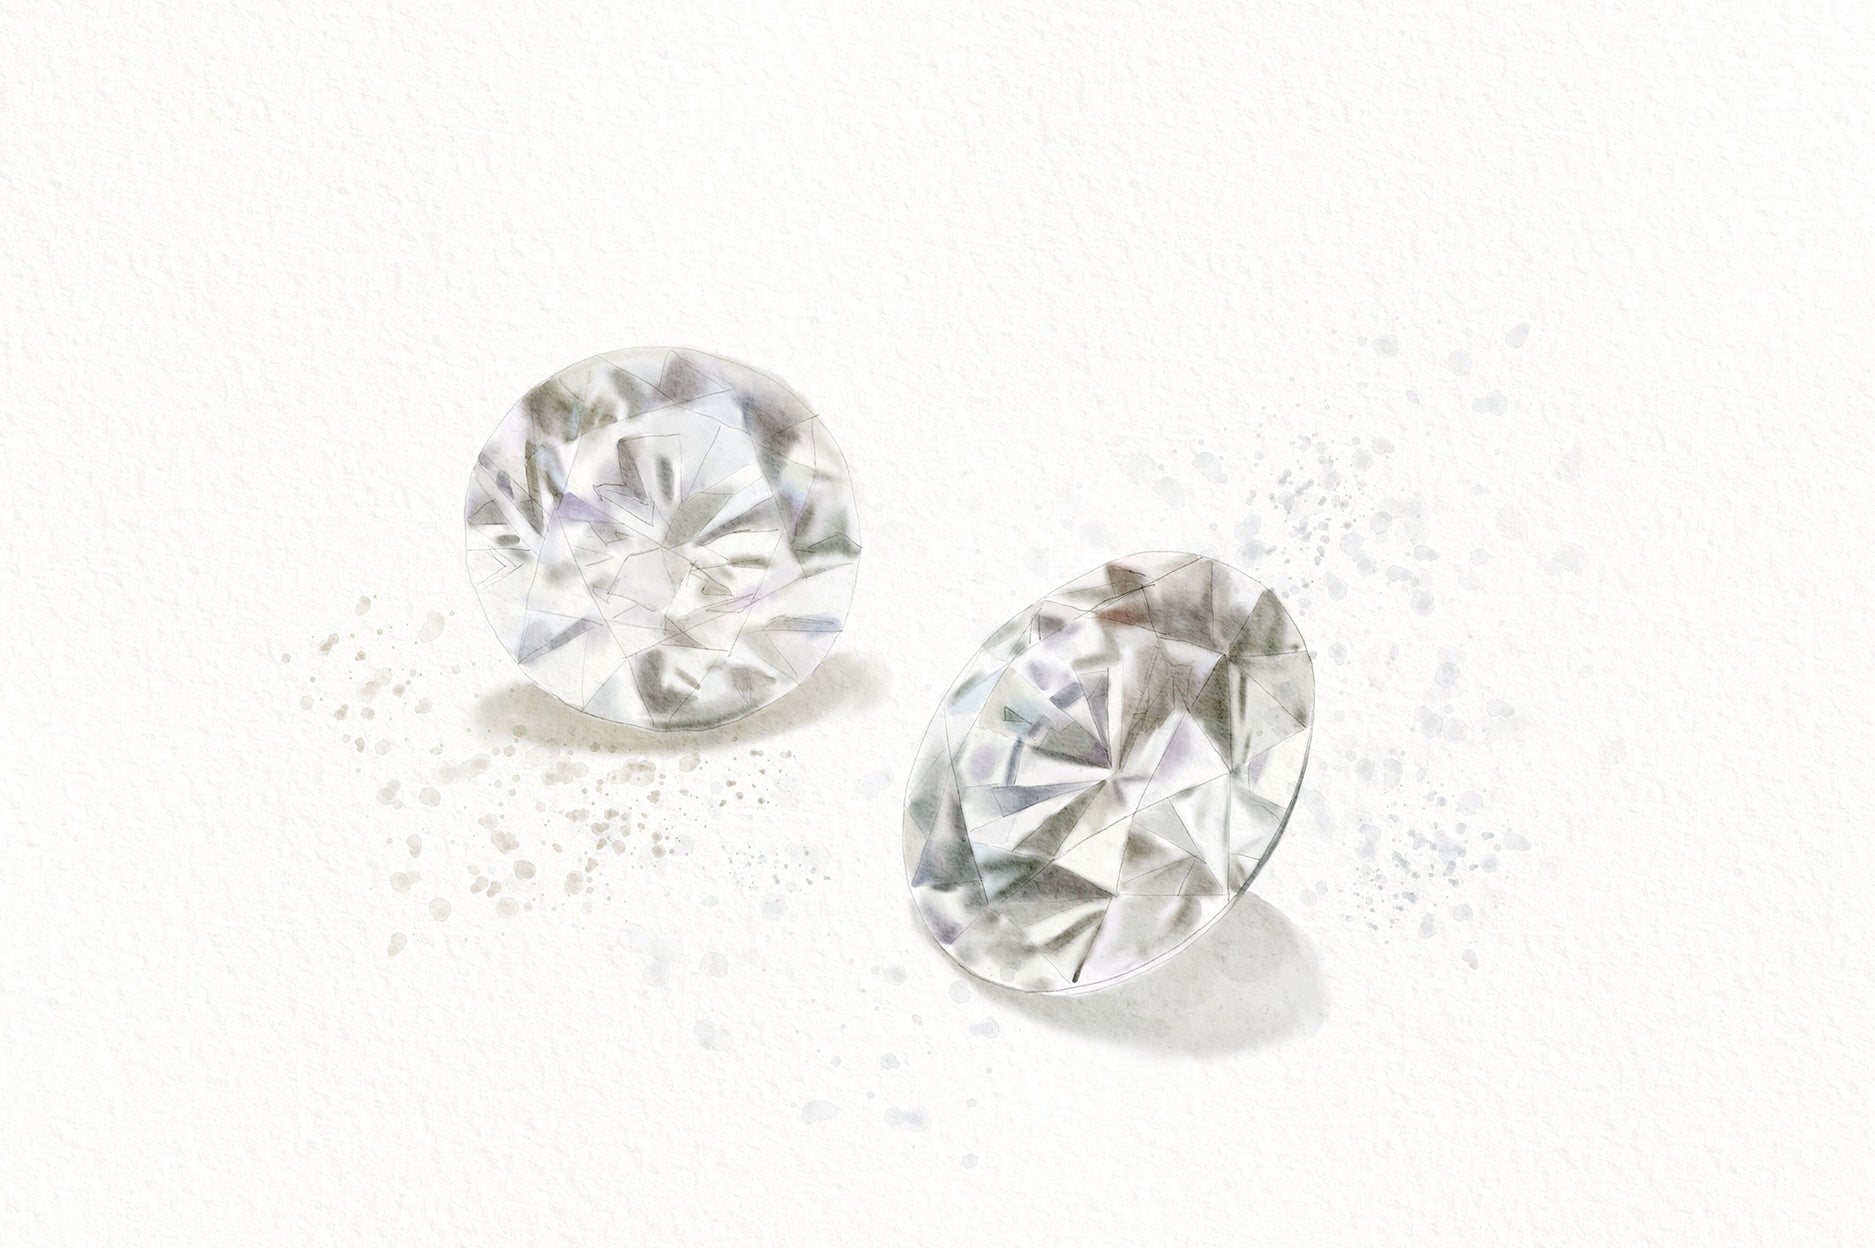 Illustration of two diamonds side by side.